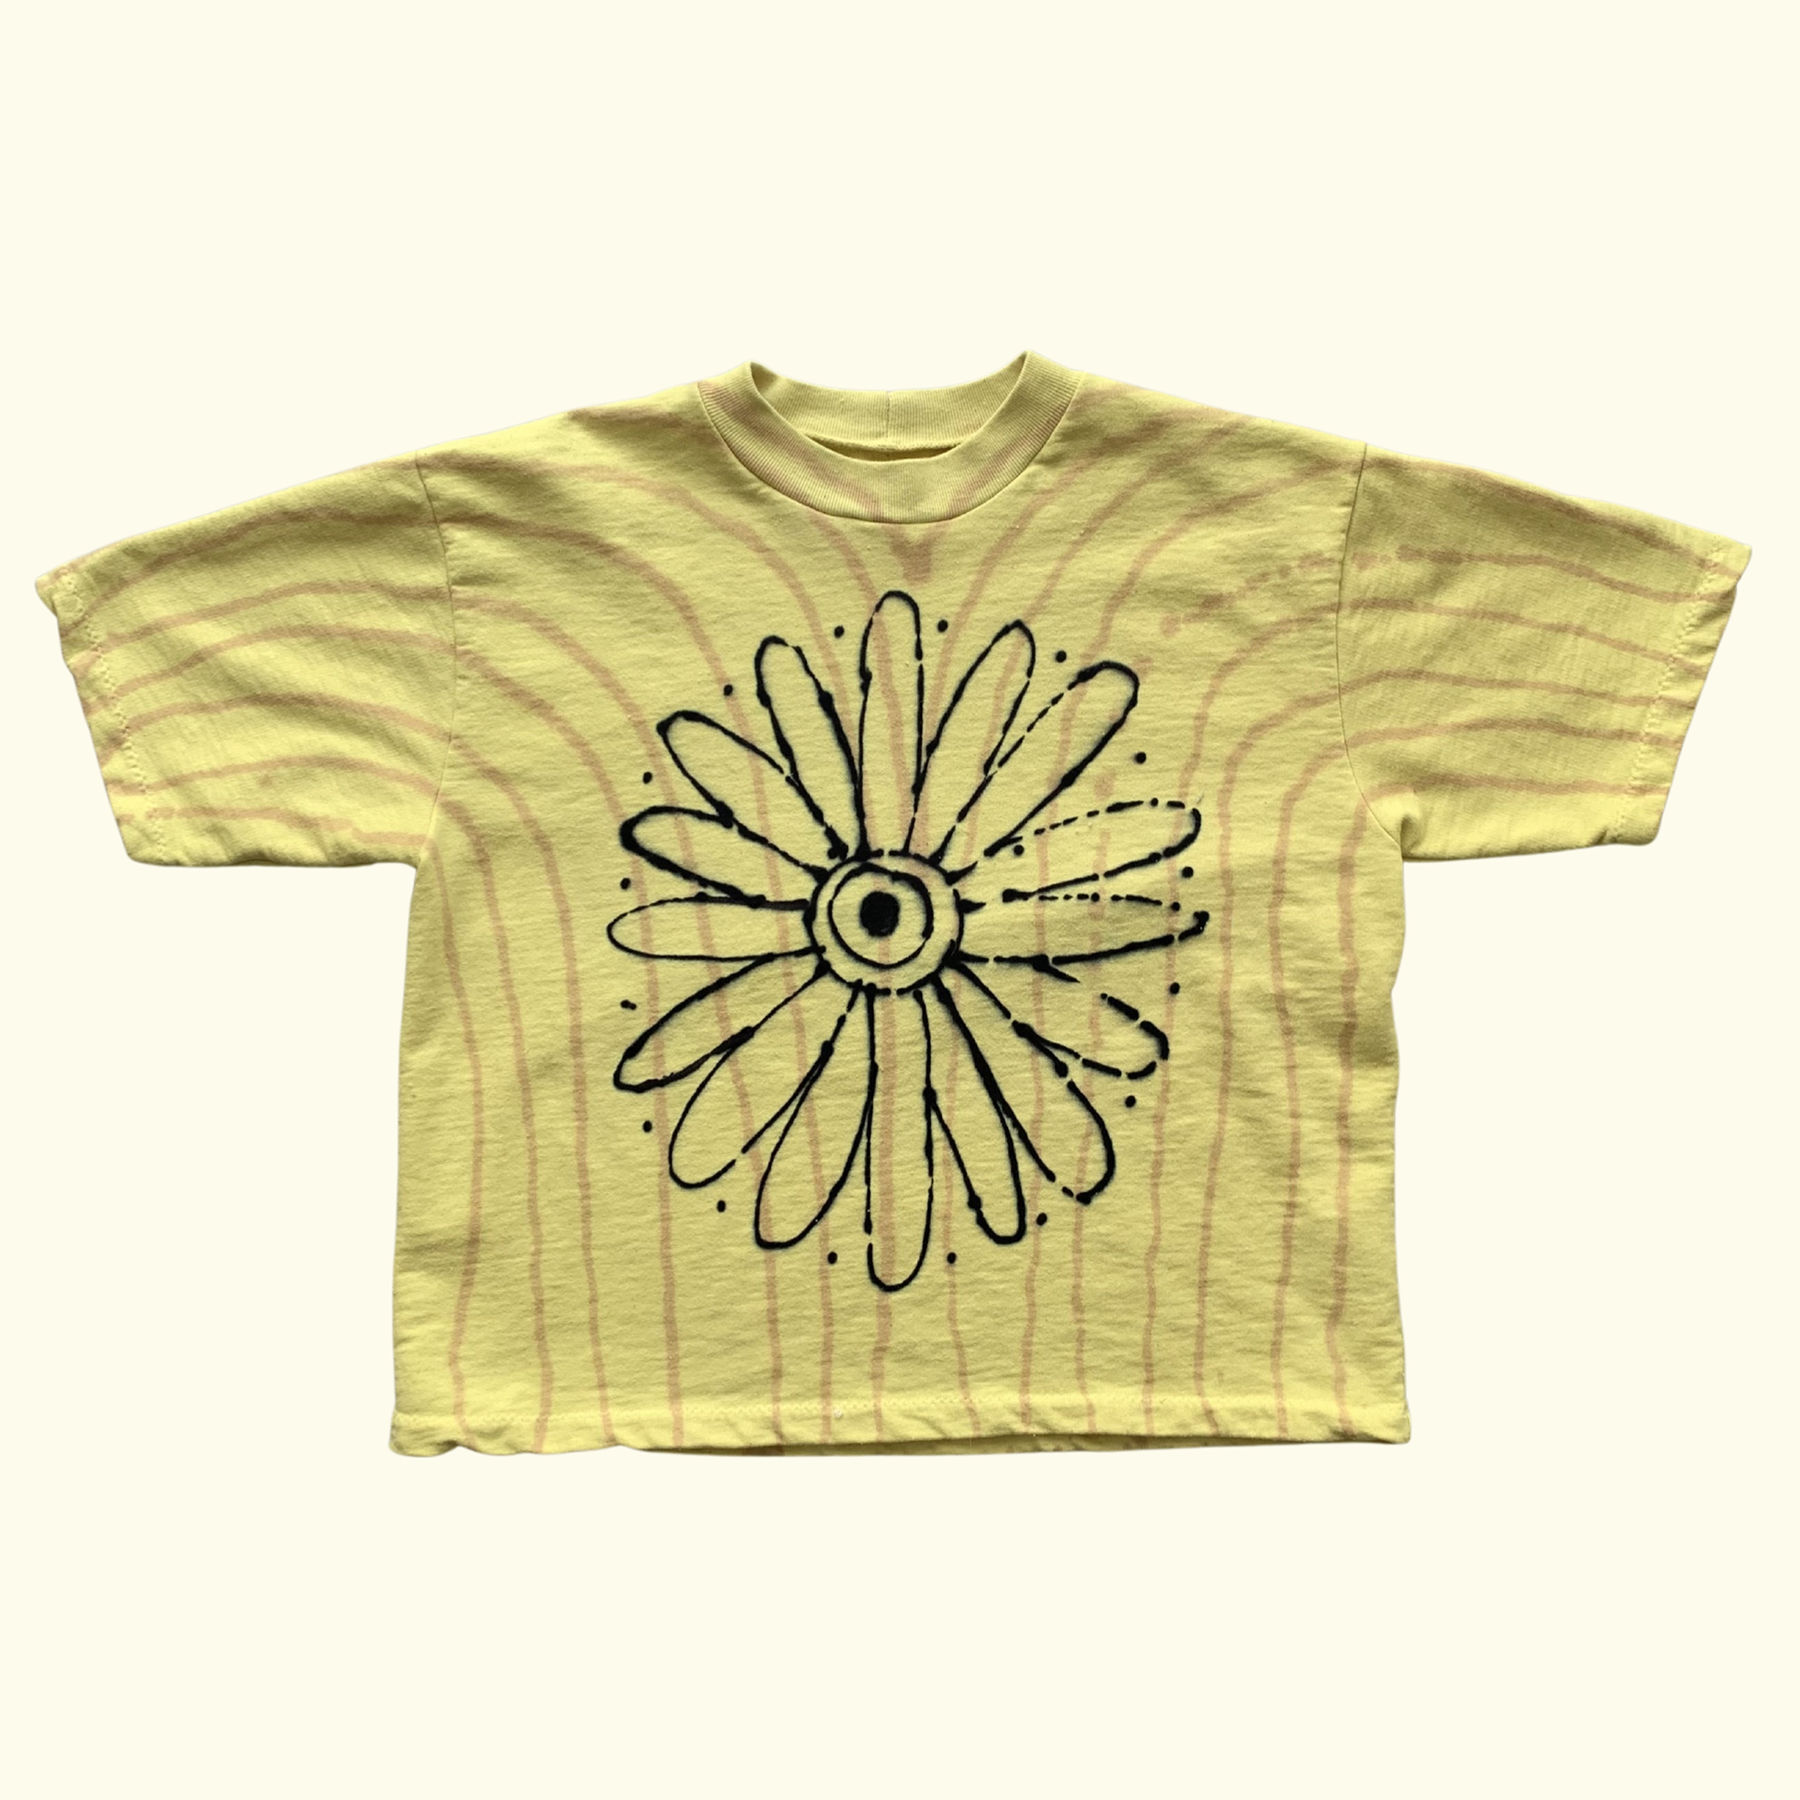 french terry heavy tee - organic usa cotton - garment dyed and dye painted - M SHORT